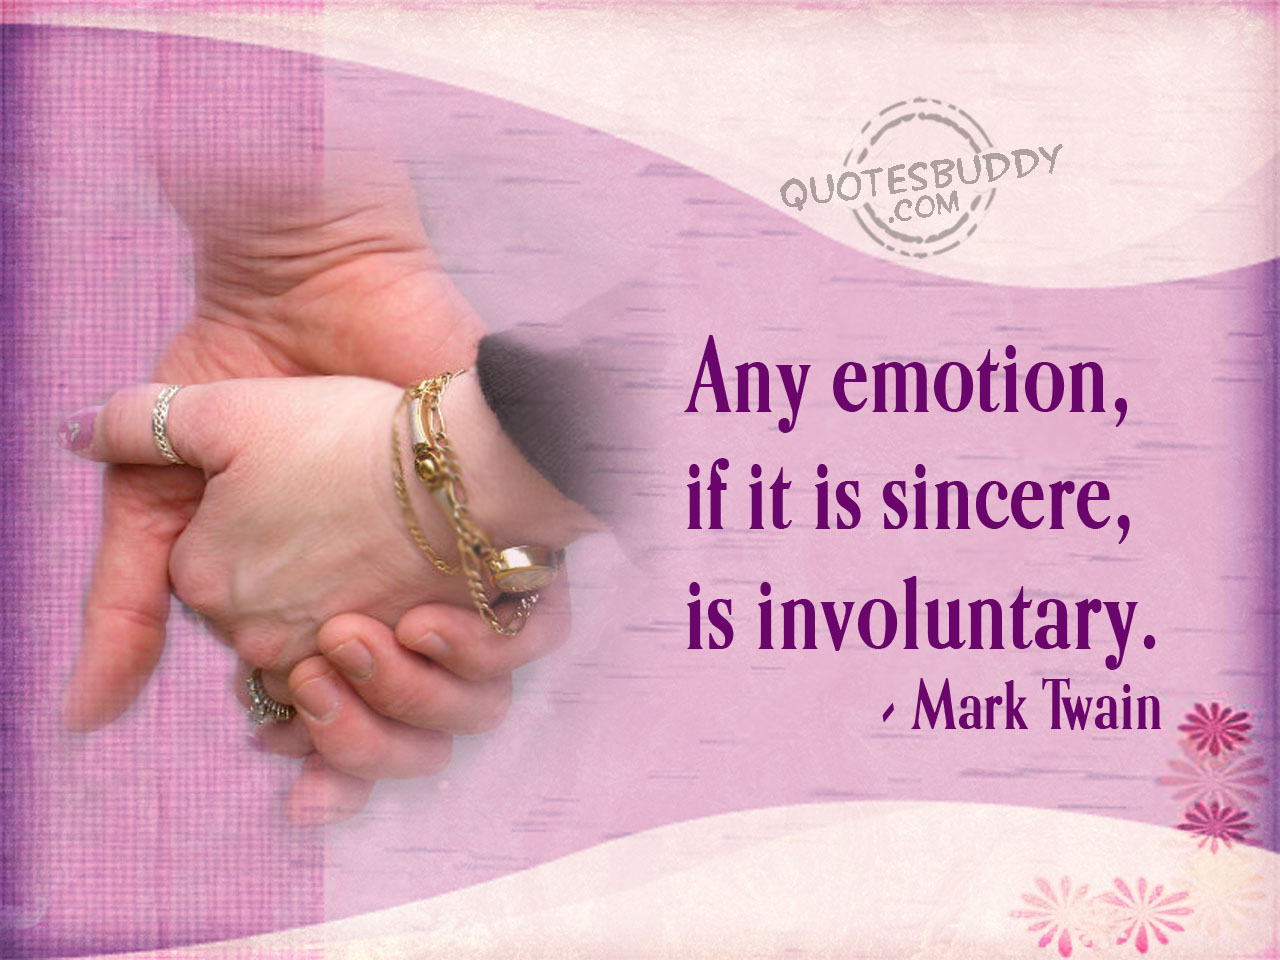 Any emotion, if it is sincere, is involuntary. Mark Twain